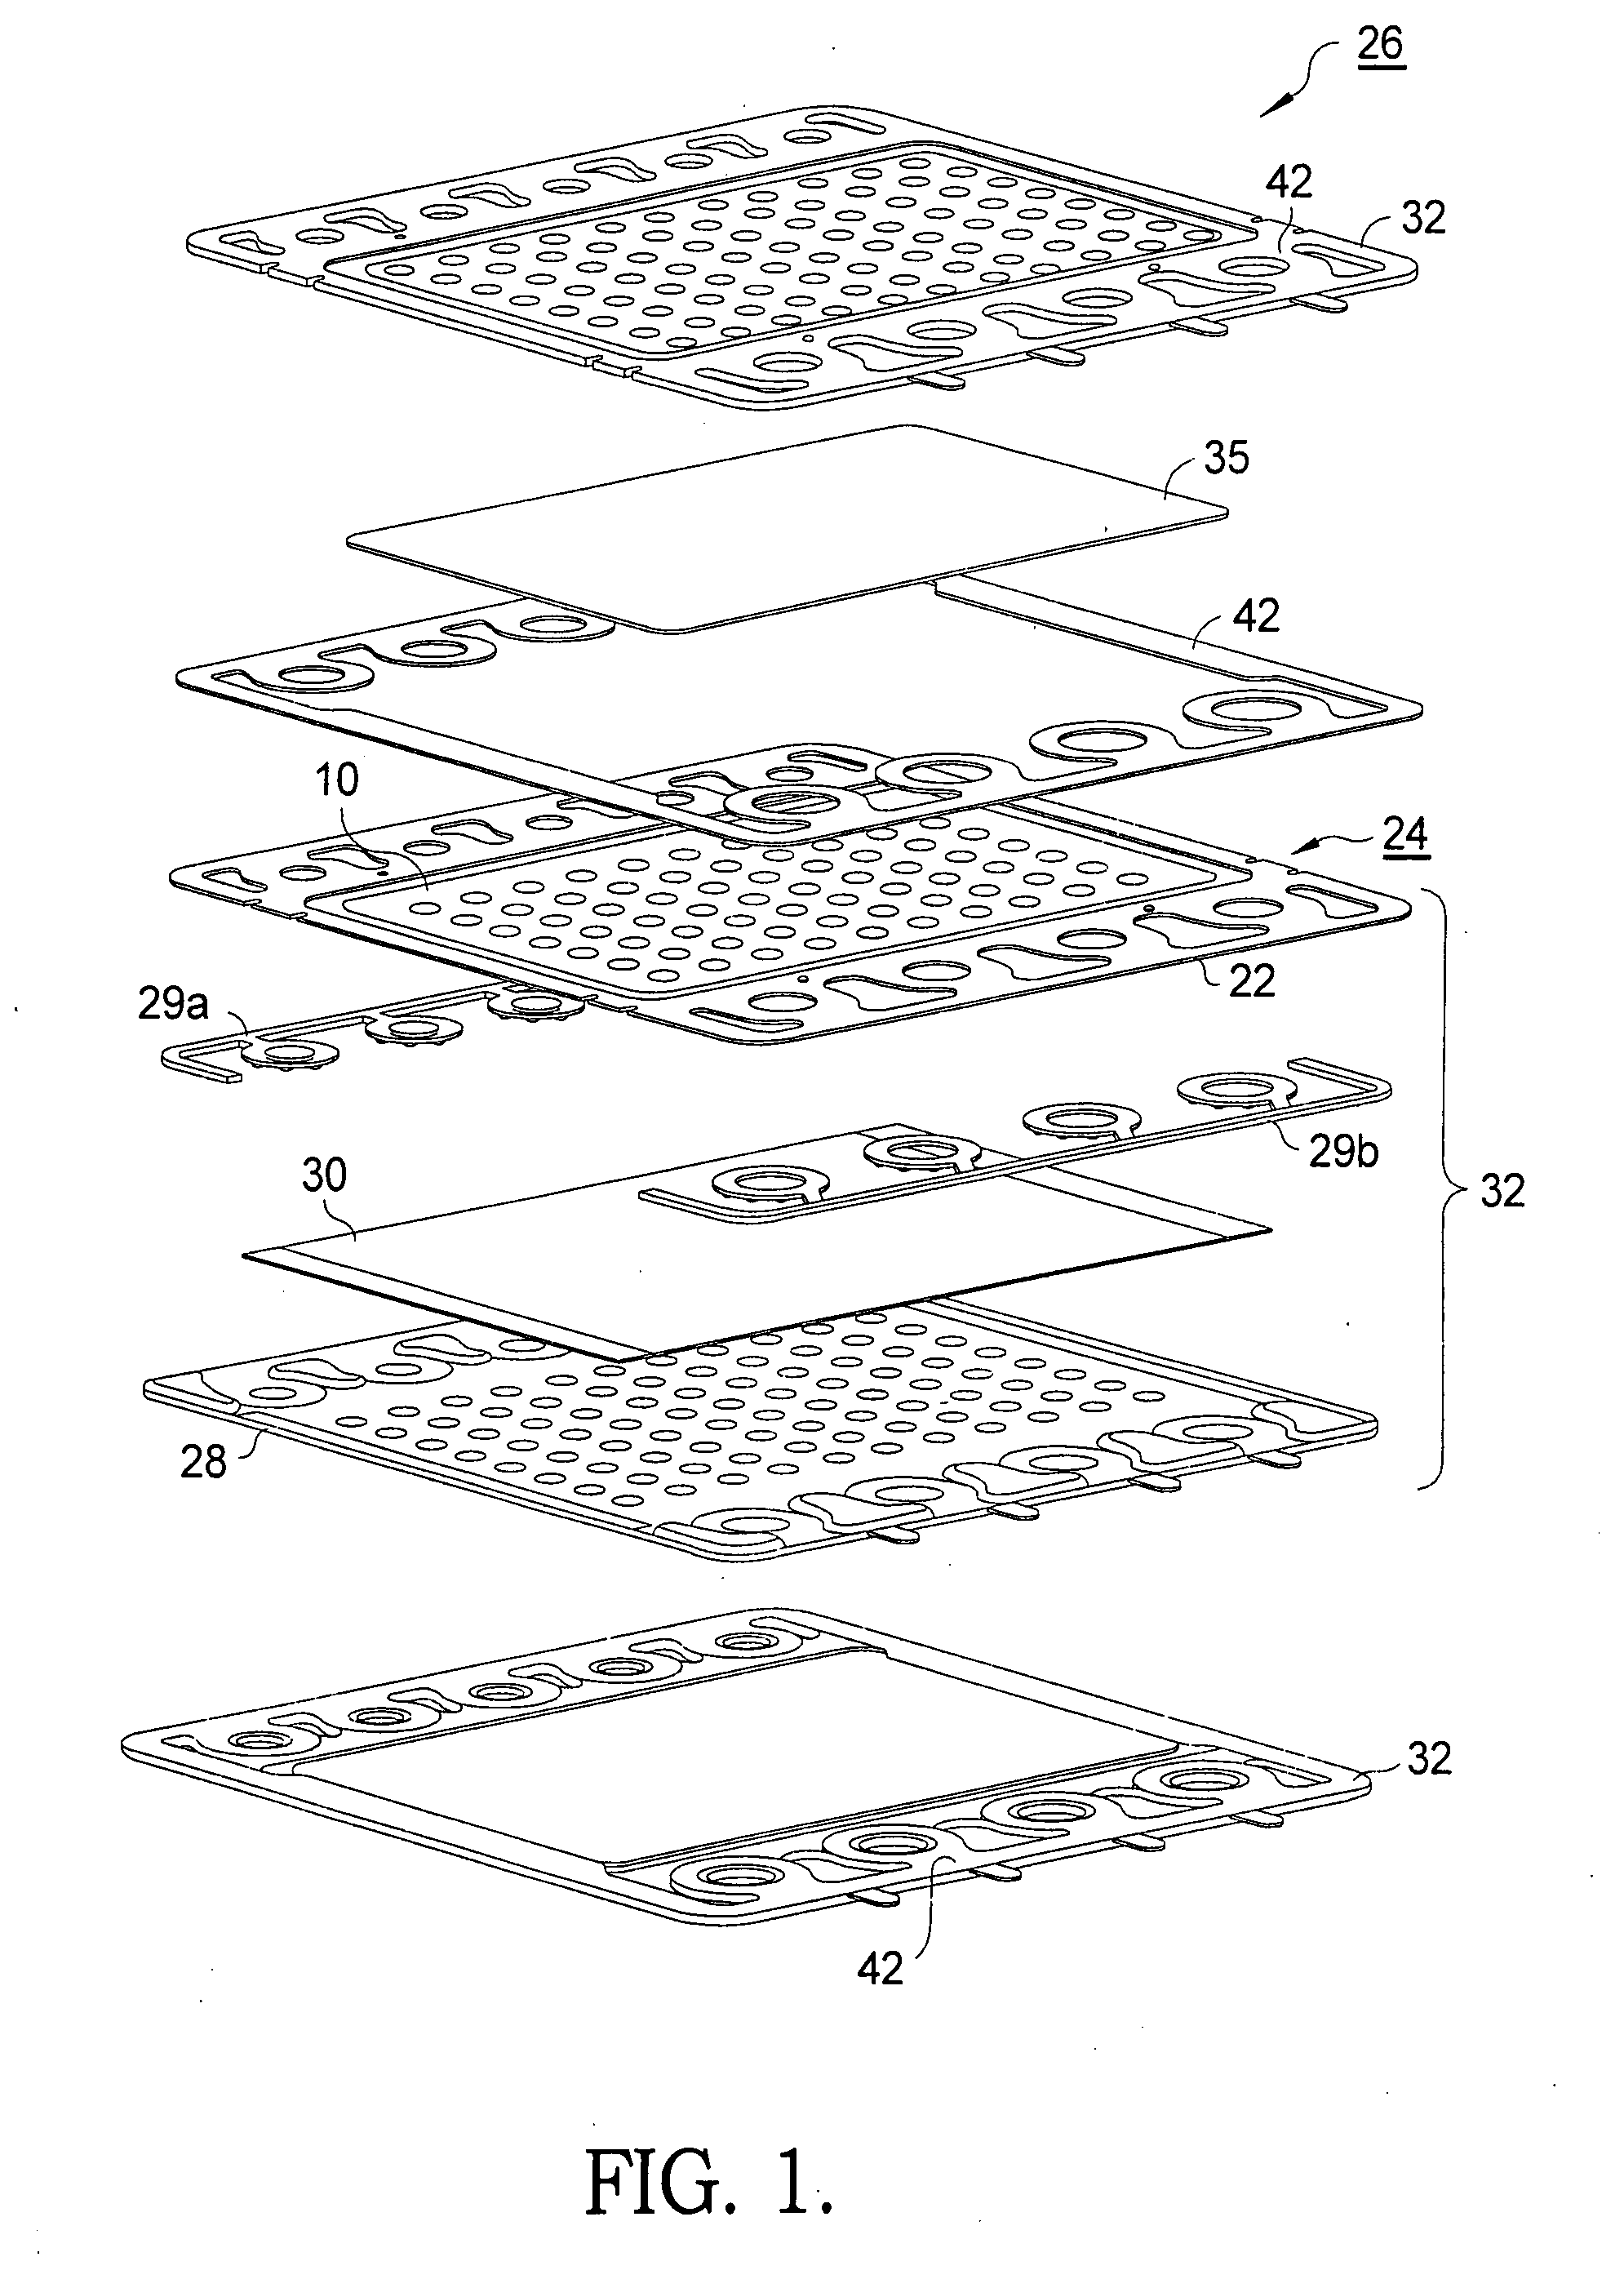 Glass seal with ceramic fiber for a solid-oxide fuel cell stack